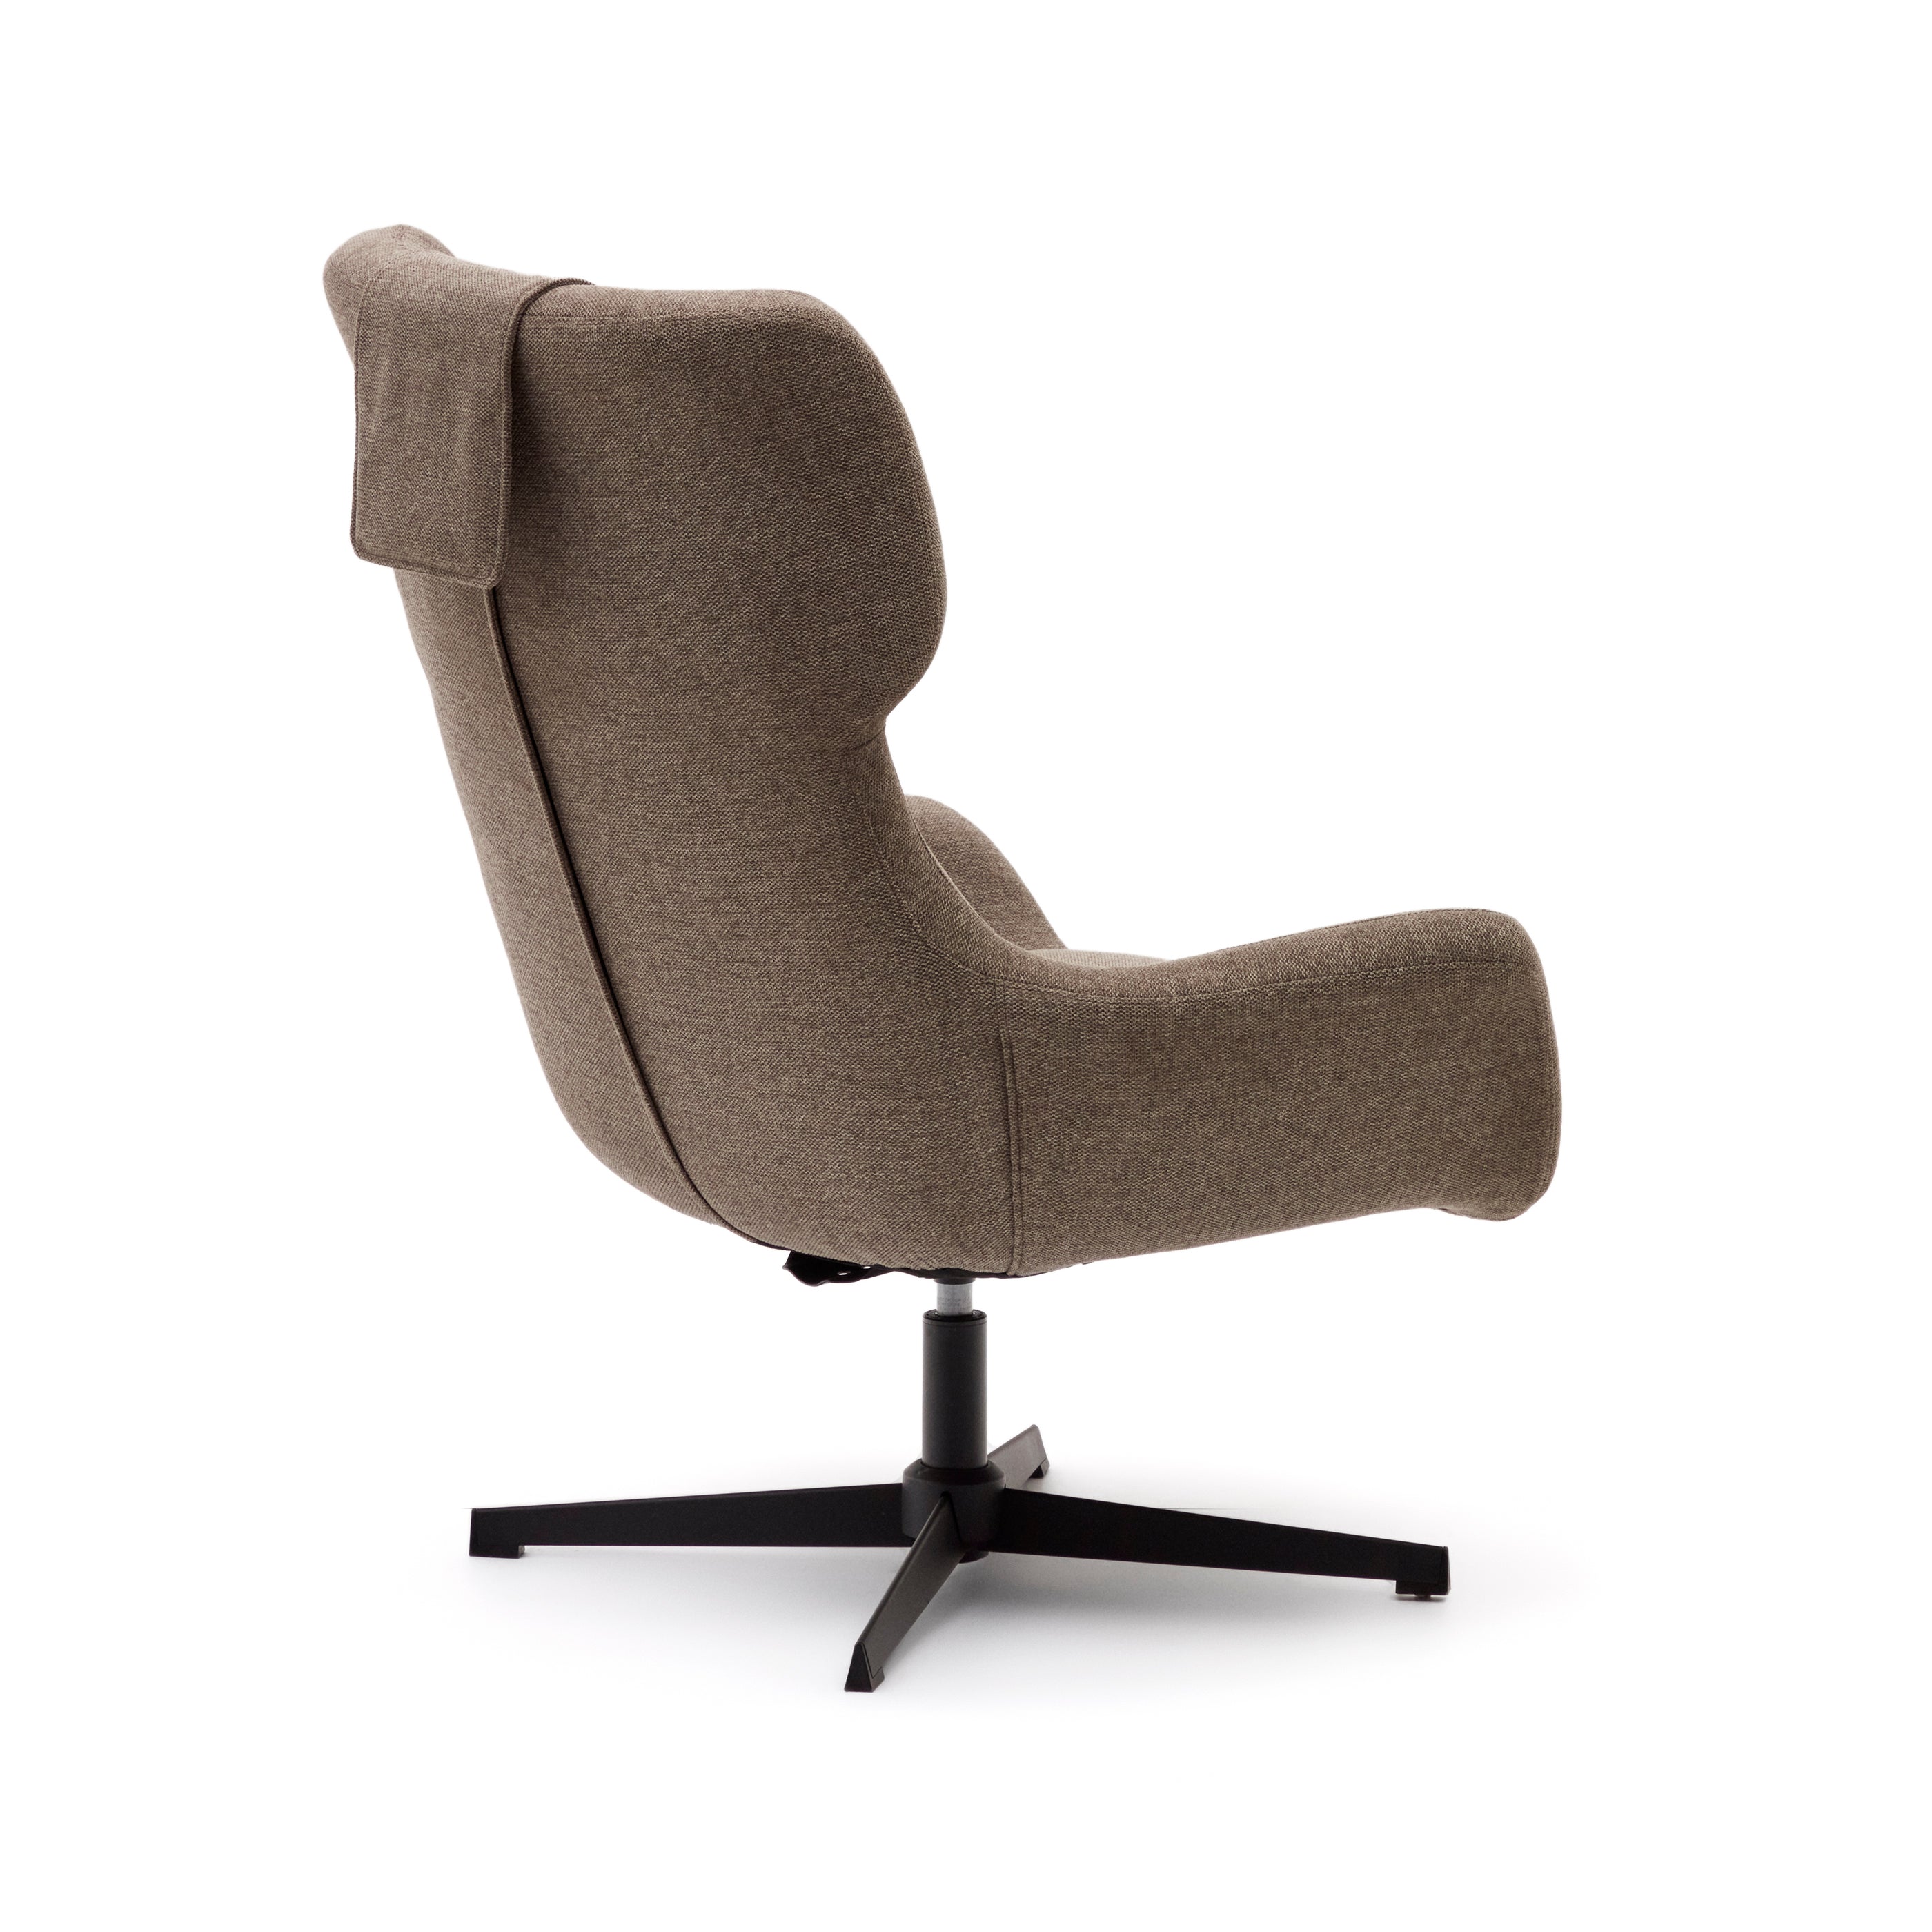 Zalina swivel armchair in light brown chenille and steel with black finish